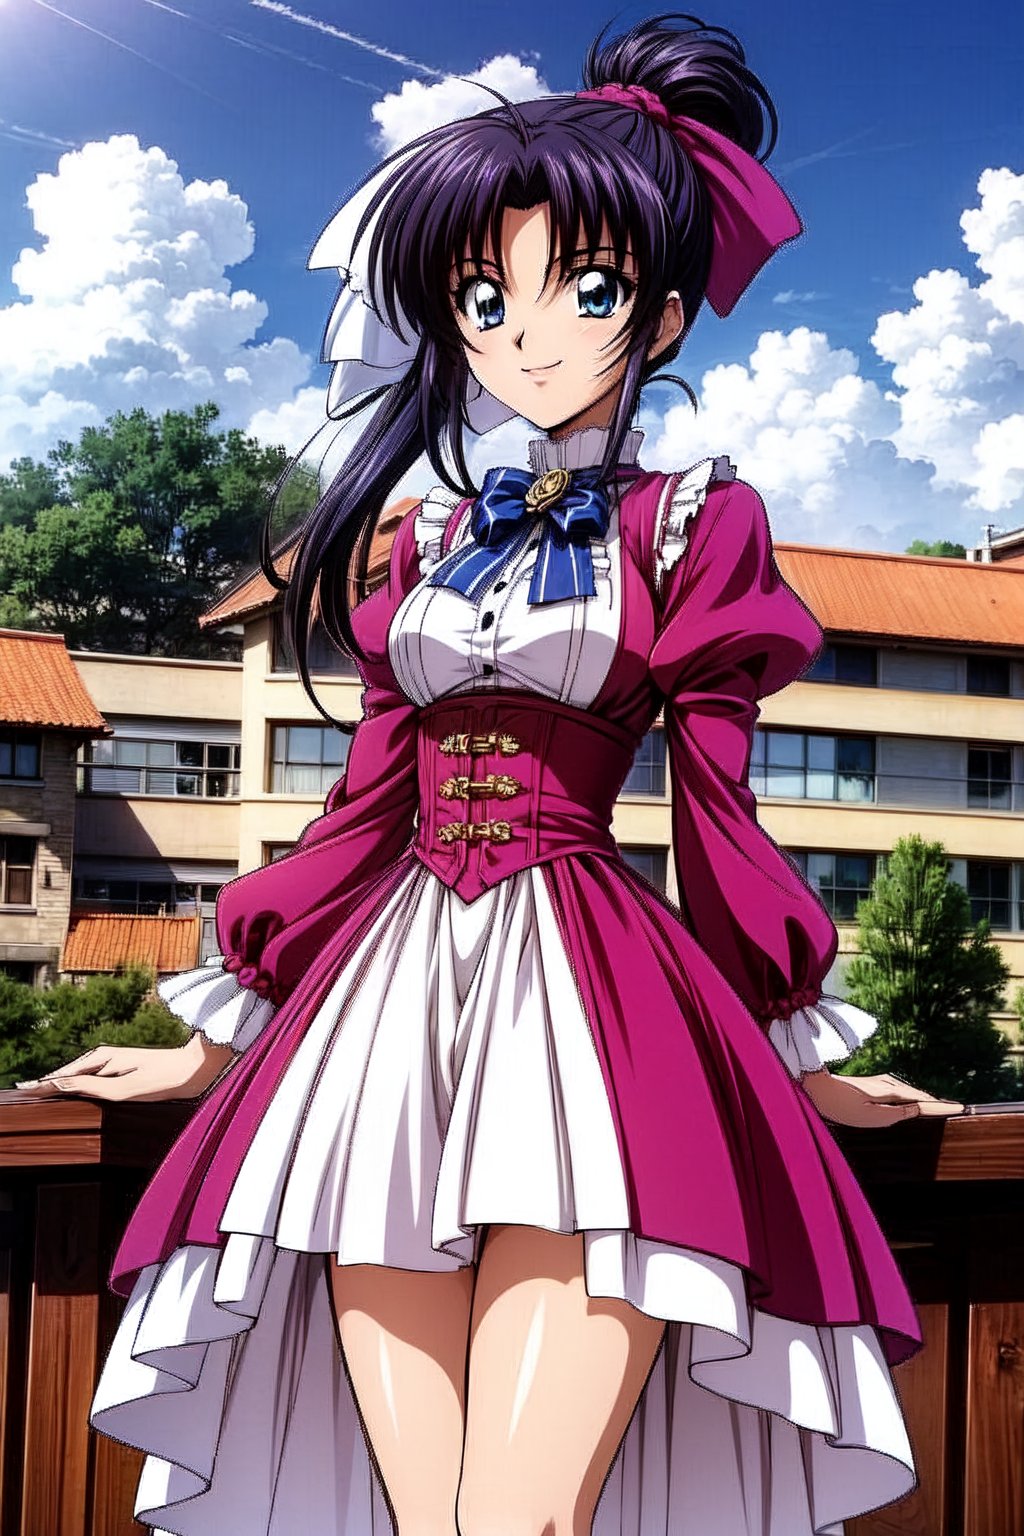 Kamiya kaoru 1996, solo, 1girl, beautiful 20 year old anime girl with: "athletic body, long legs, beautiful legs: 1. 2. (properly proportioned female body), medium bust, blue eyes, beautiful eyes: 1. 2., black hair, long hair tied with bow in a high ponytail"; wear Victorian dress, lace petticoat skirt; smiling shyly, stand on the city, hair in the wind; legs focus, in high quality, 8k, High Definition, HD, sakura_pattern, Kamiya Kaoru 1996,victorian